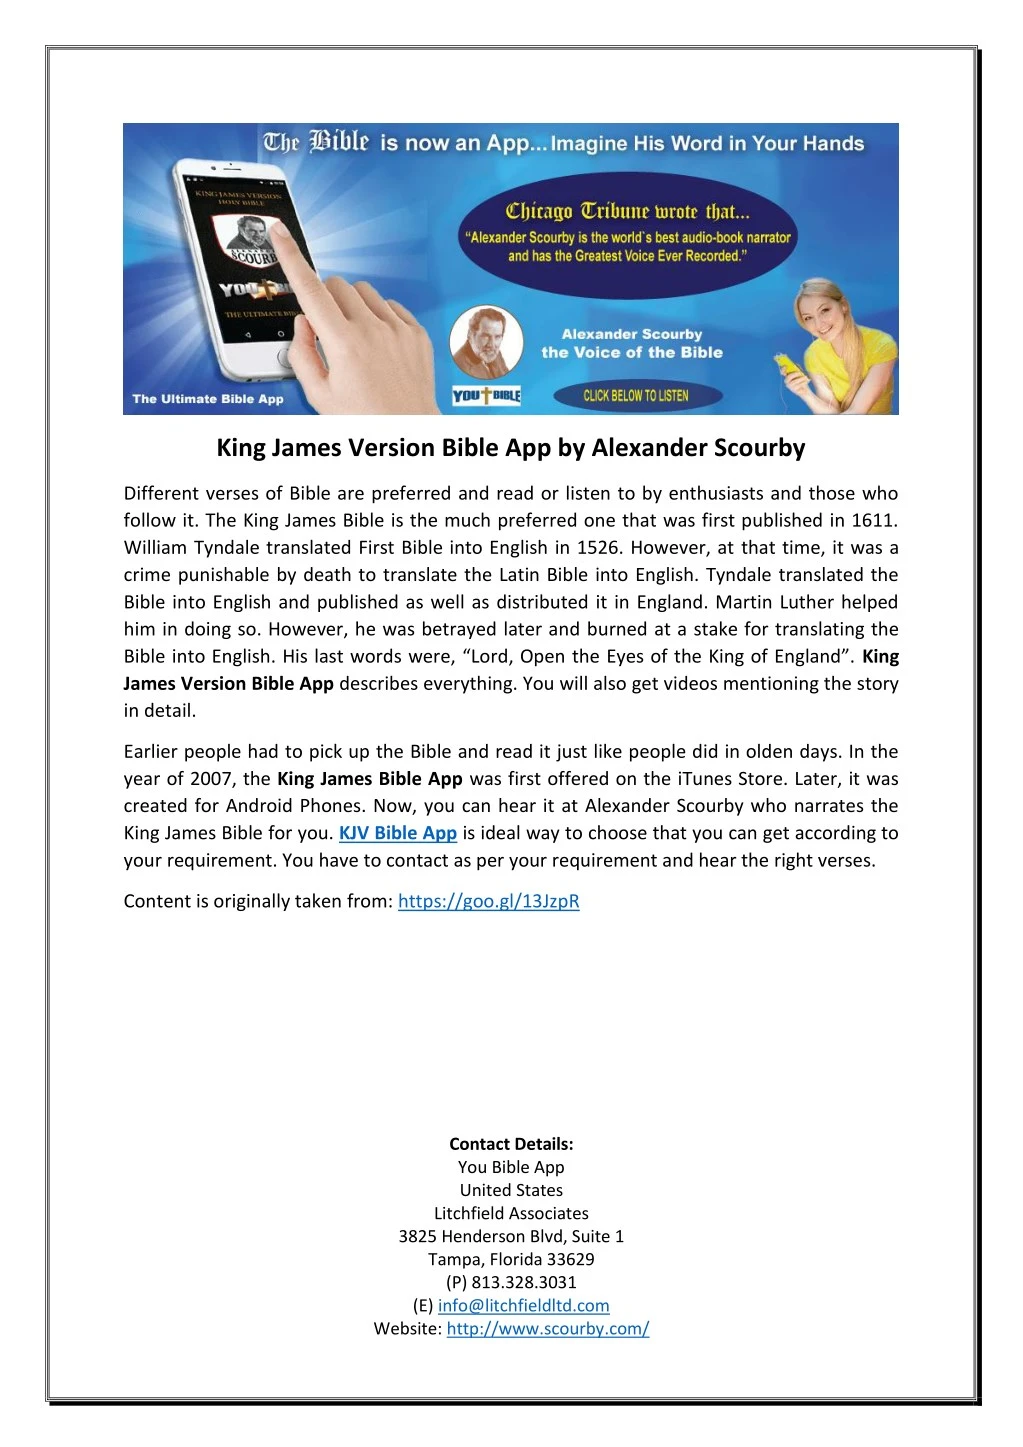 king james version bible app by alexander scourby